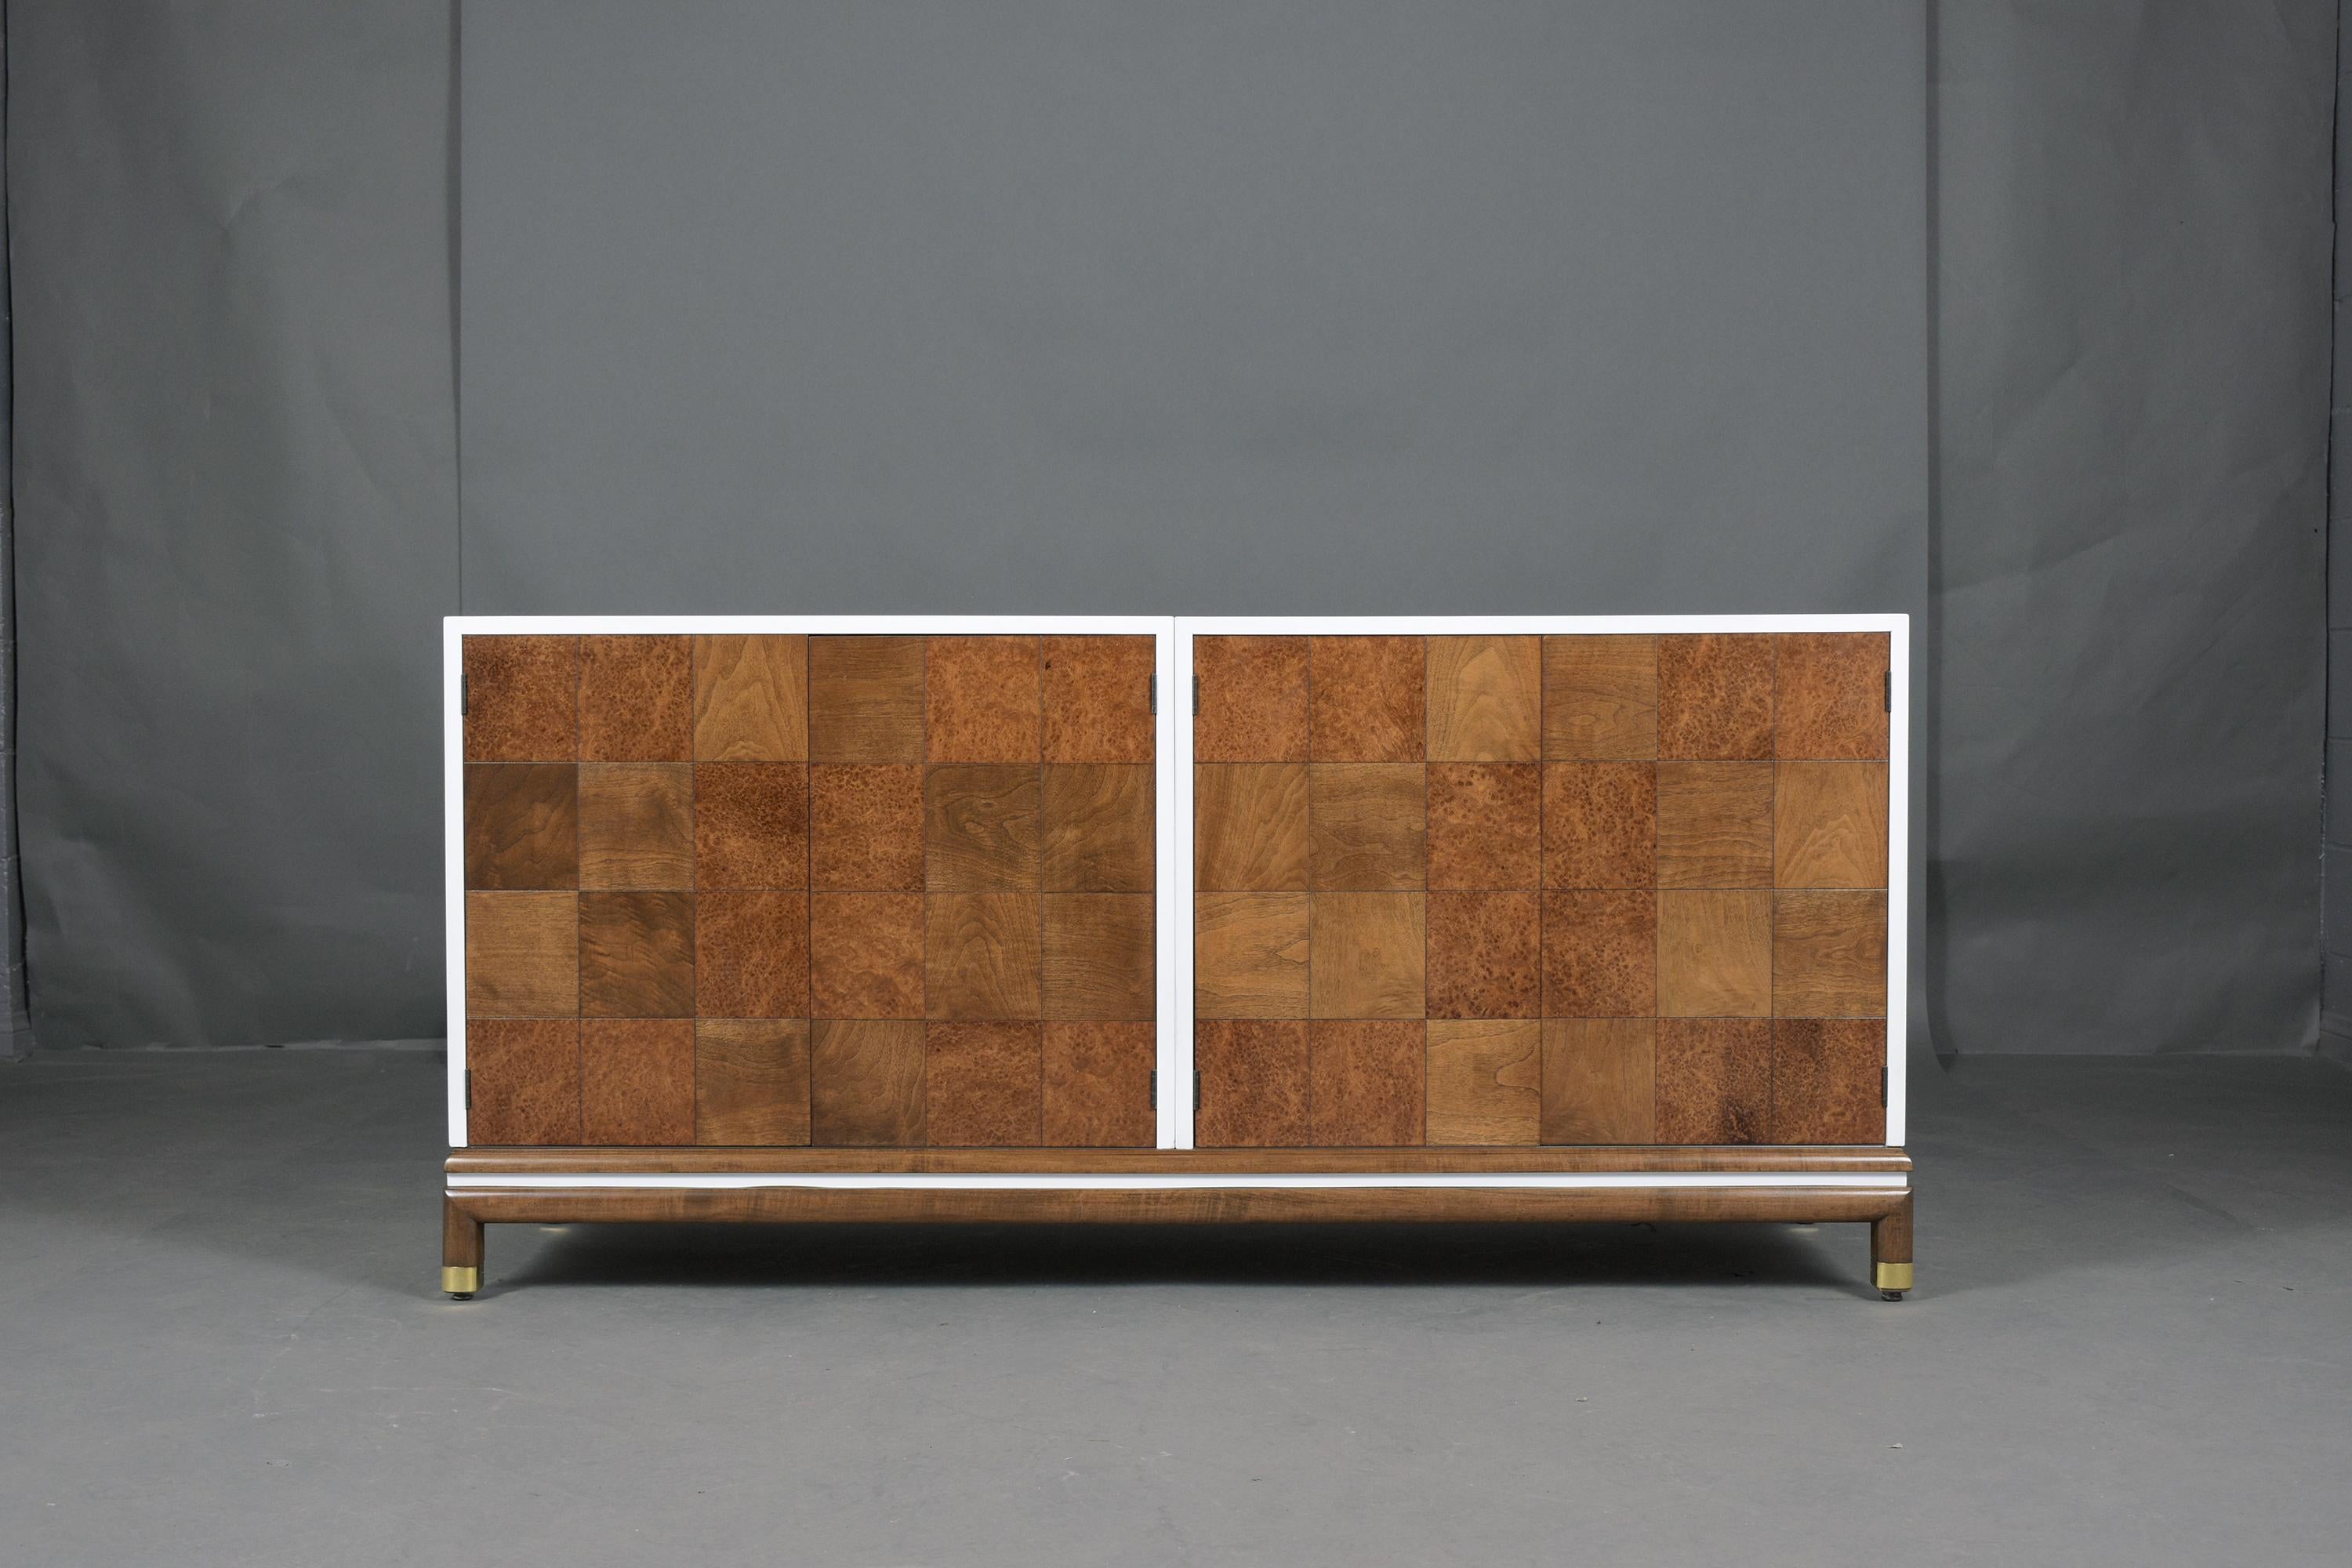 An extraordinary mid-century executive cabinet crafted out of walnut in great condition and professionally restored by our team of expert craftsmen. This credenza has been newly finished in walnut and white color combination with the lacquered